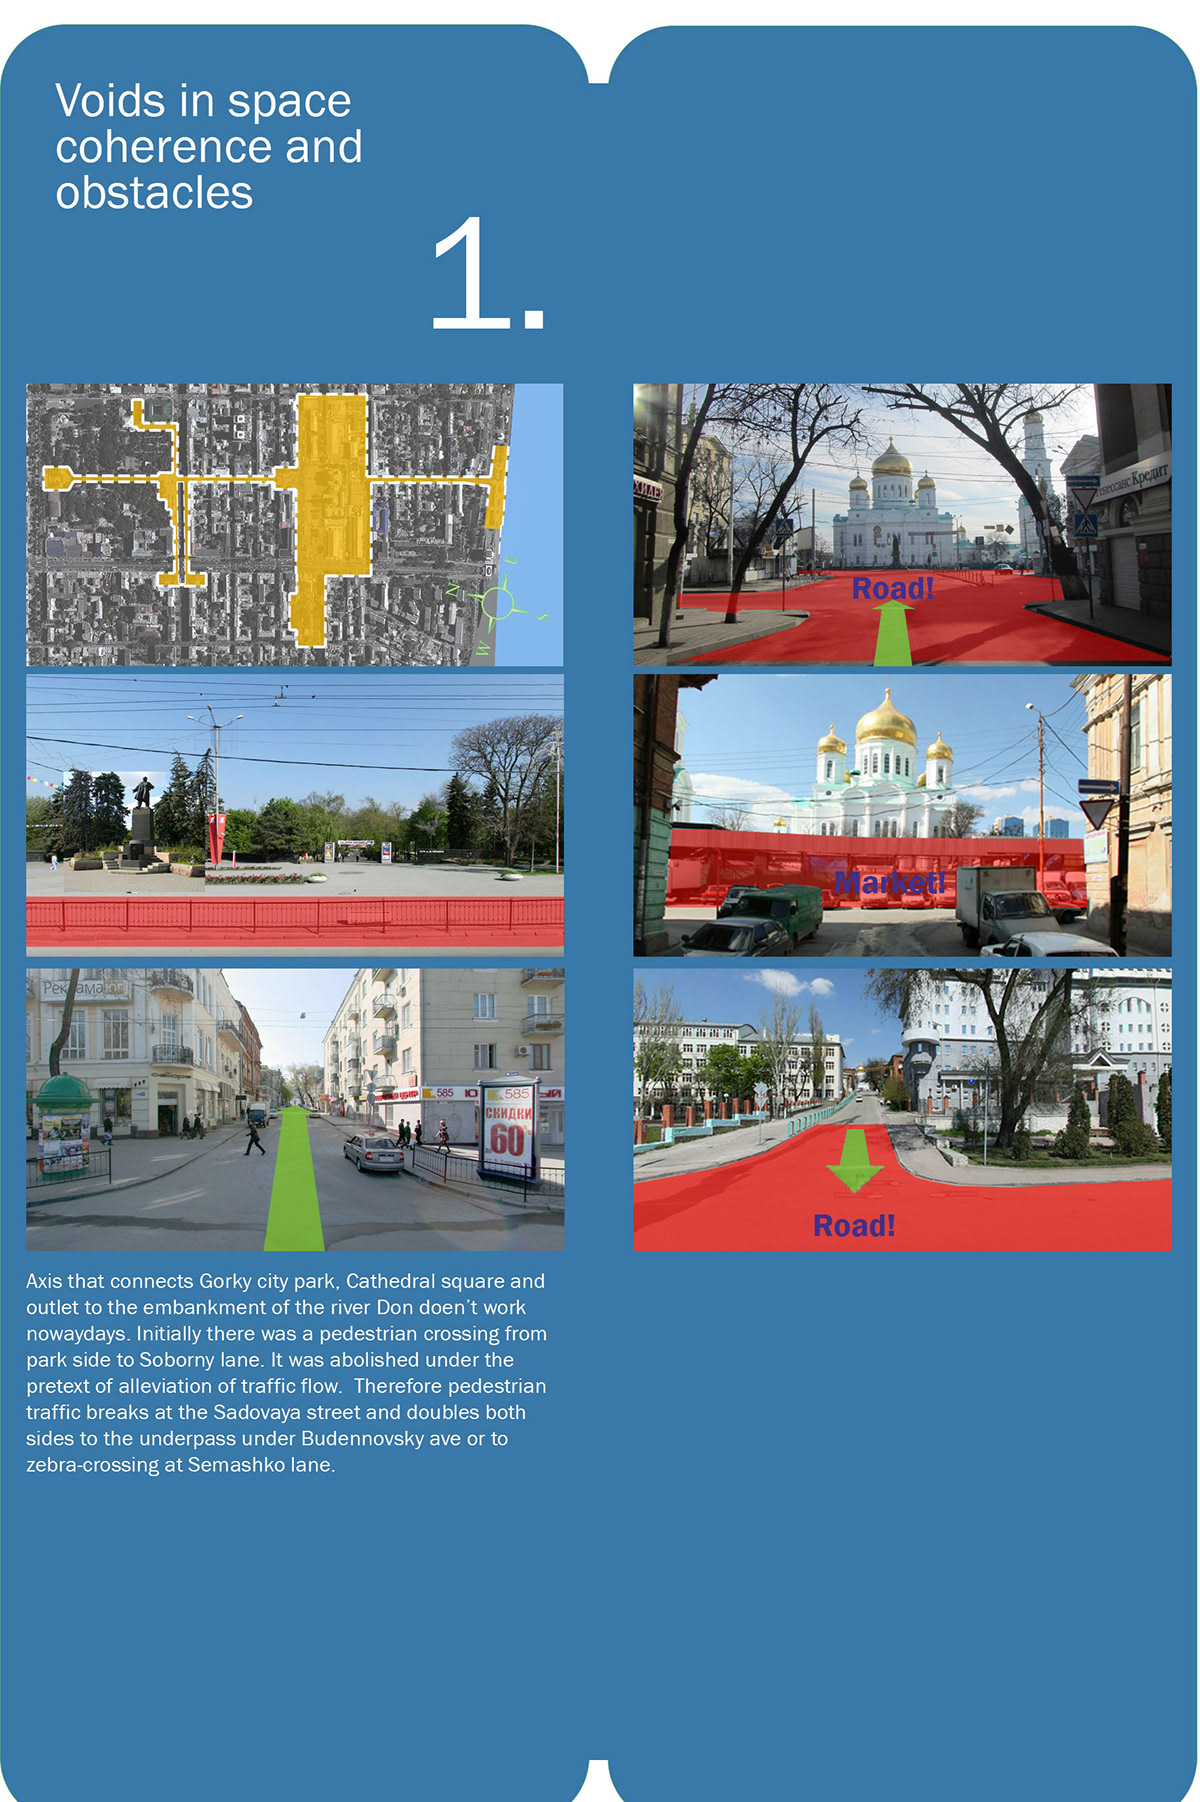 Urban Design city city planning urban planning spaces for people research Rostov-on-Don Compact city urbanism   Public Transit